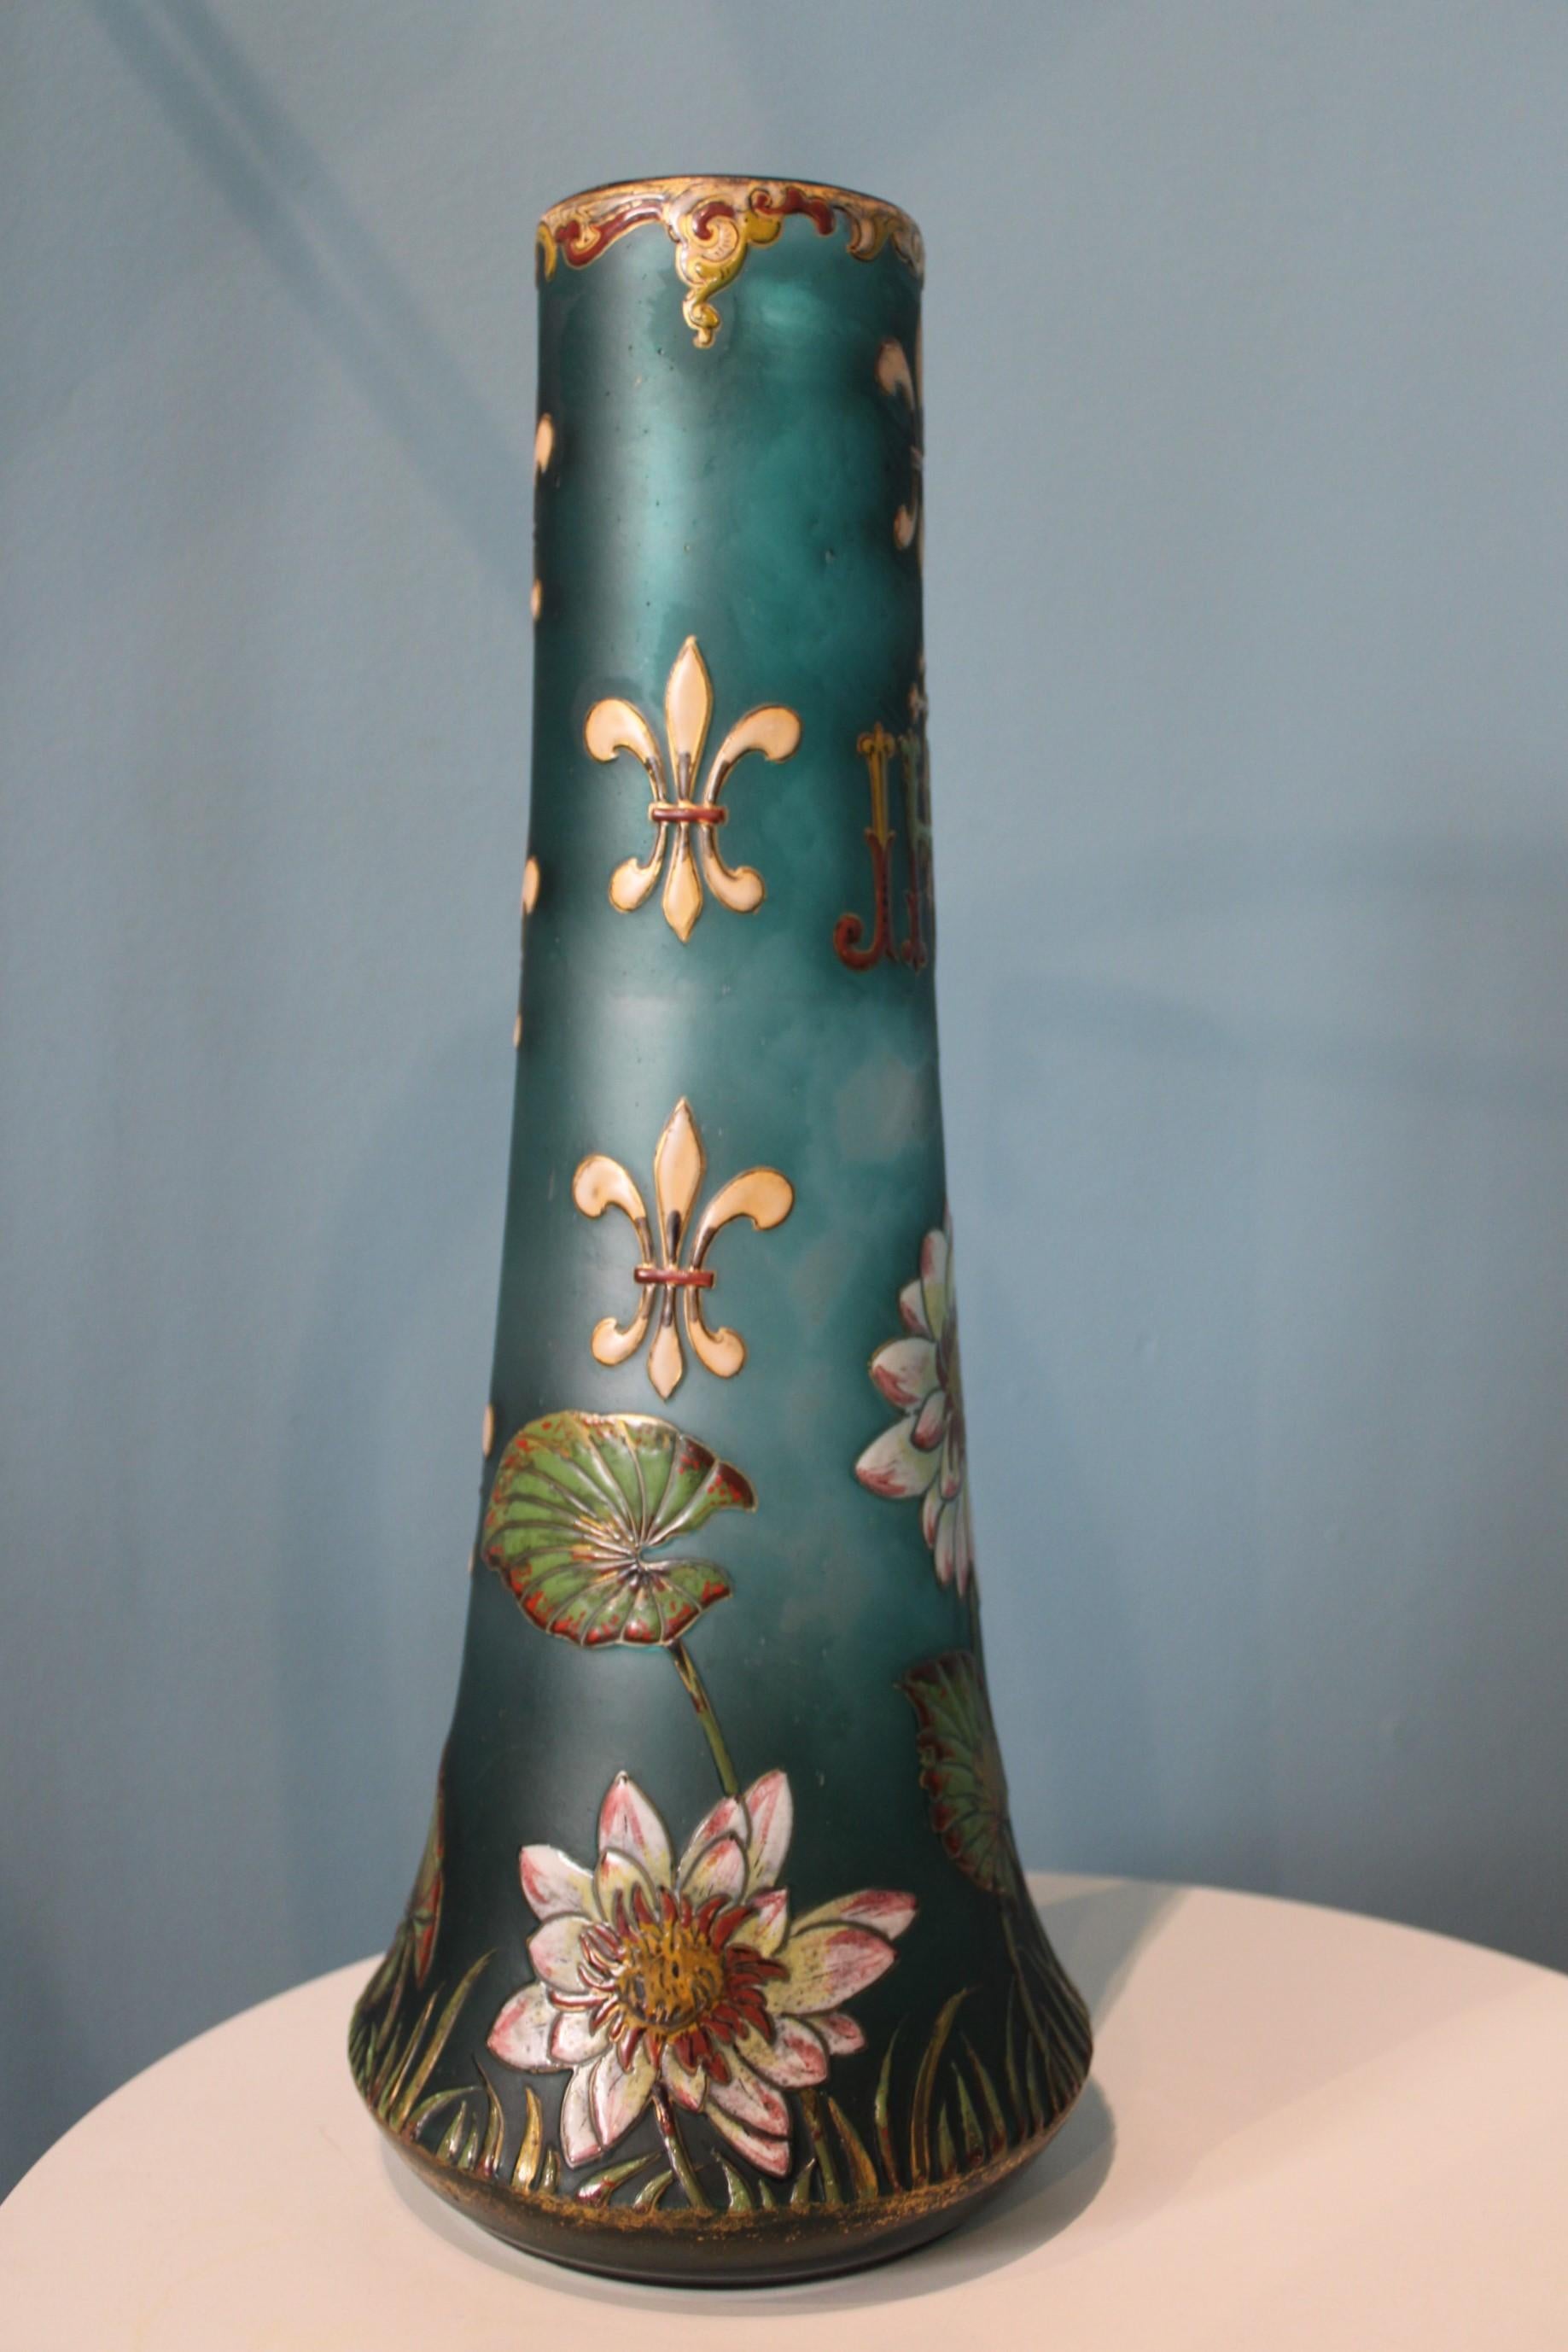 Glass vase by Burgun, Schverer & Cie.
Decorated with flowers and Lorraine crosses.
Signed 